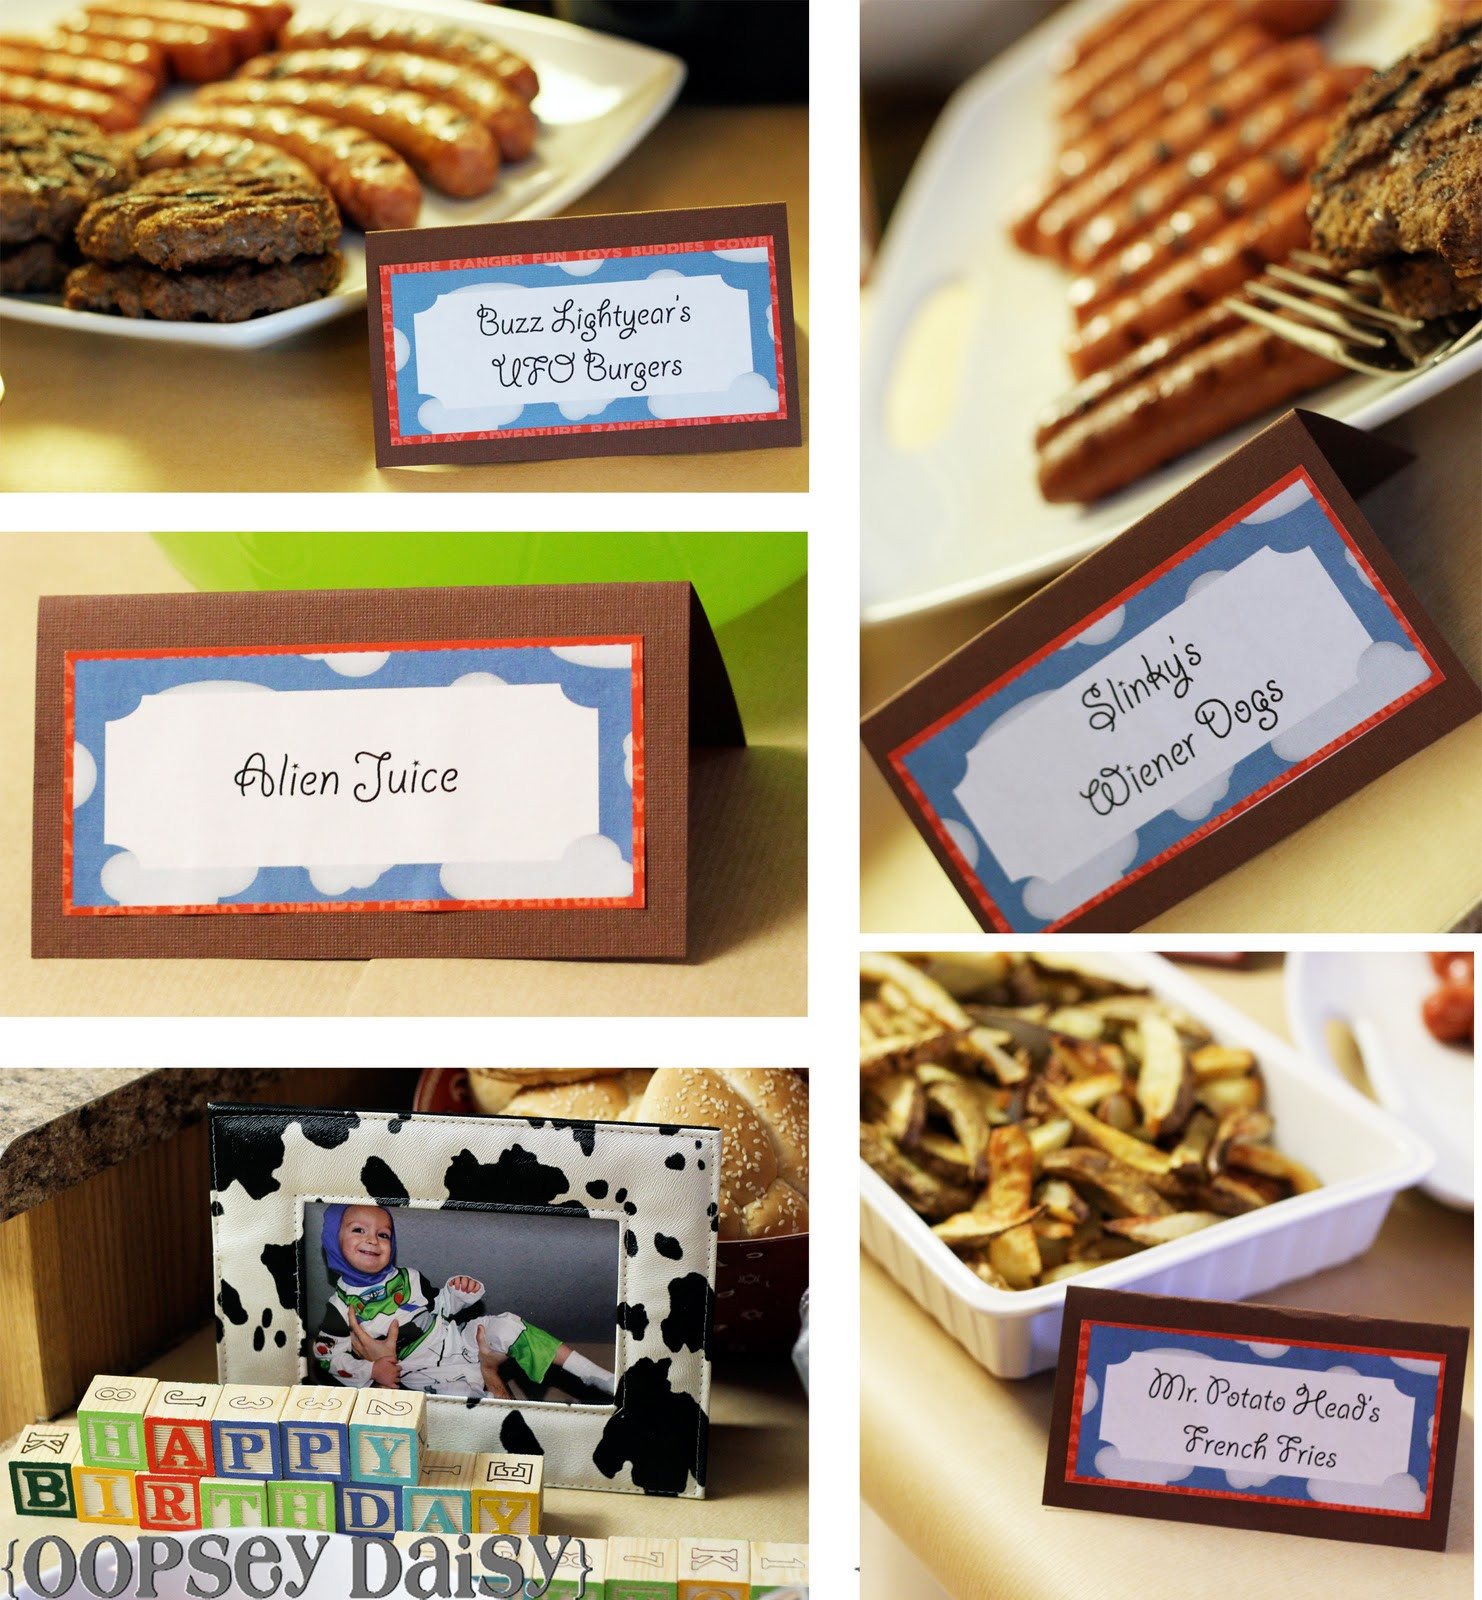 Toy Story Party Food Ideas
 Toy Story Birthday Party